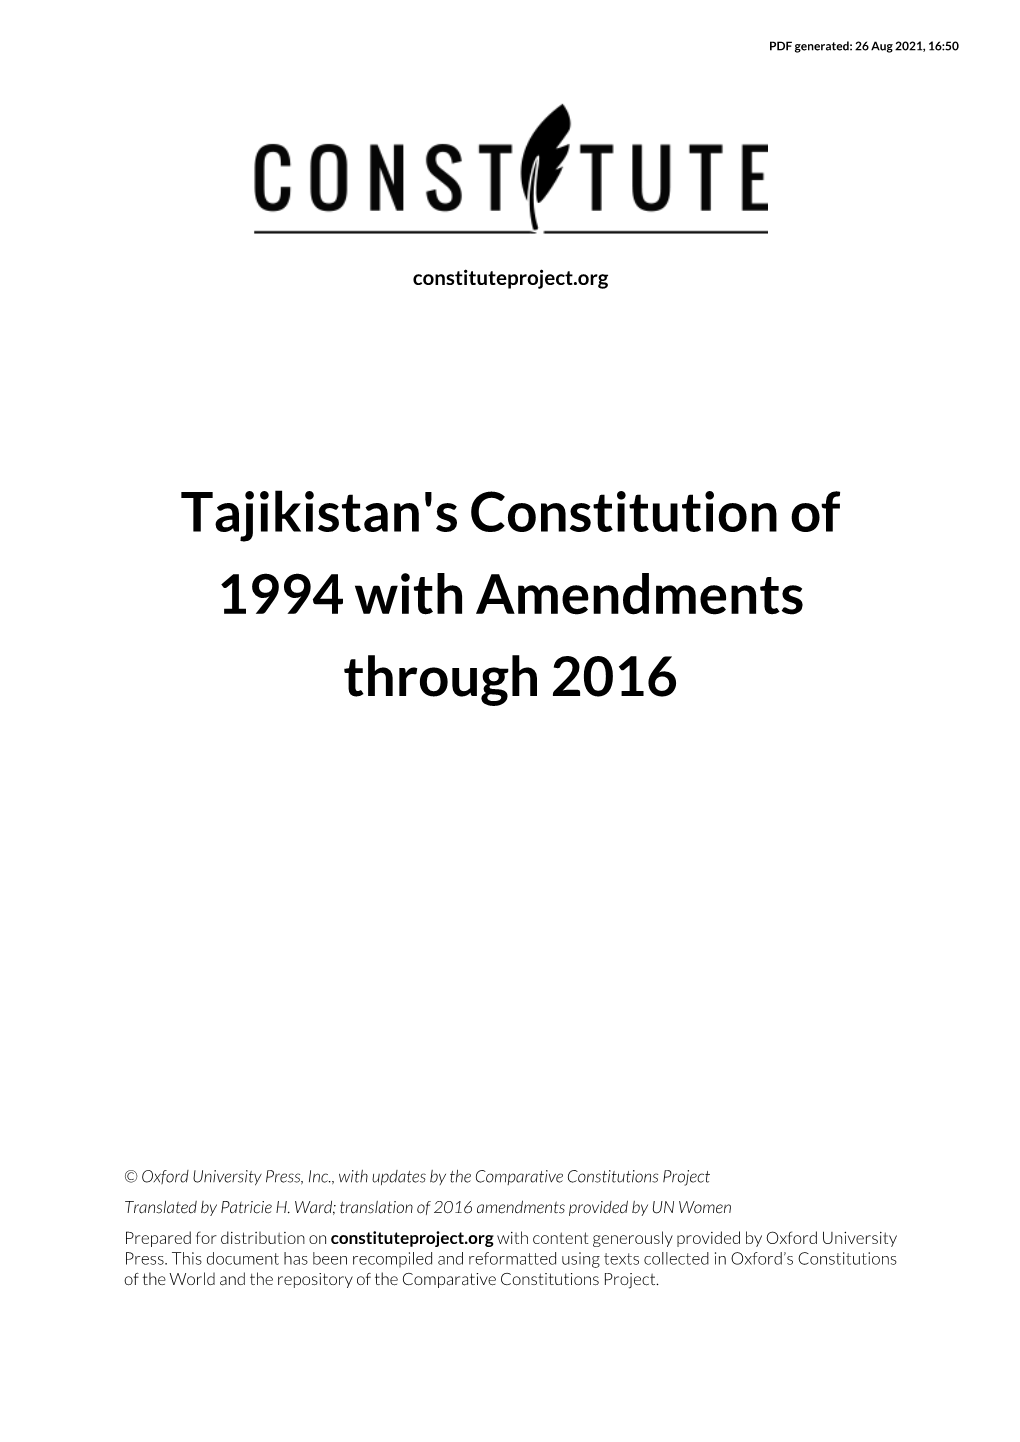 Tajikistan's Constitution of 1994 with Amendments Through 2016